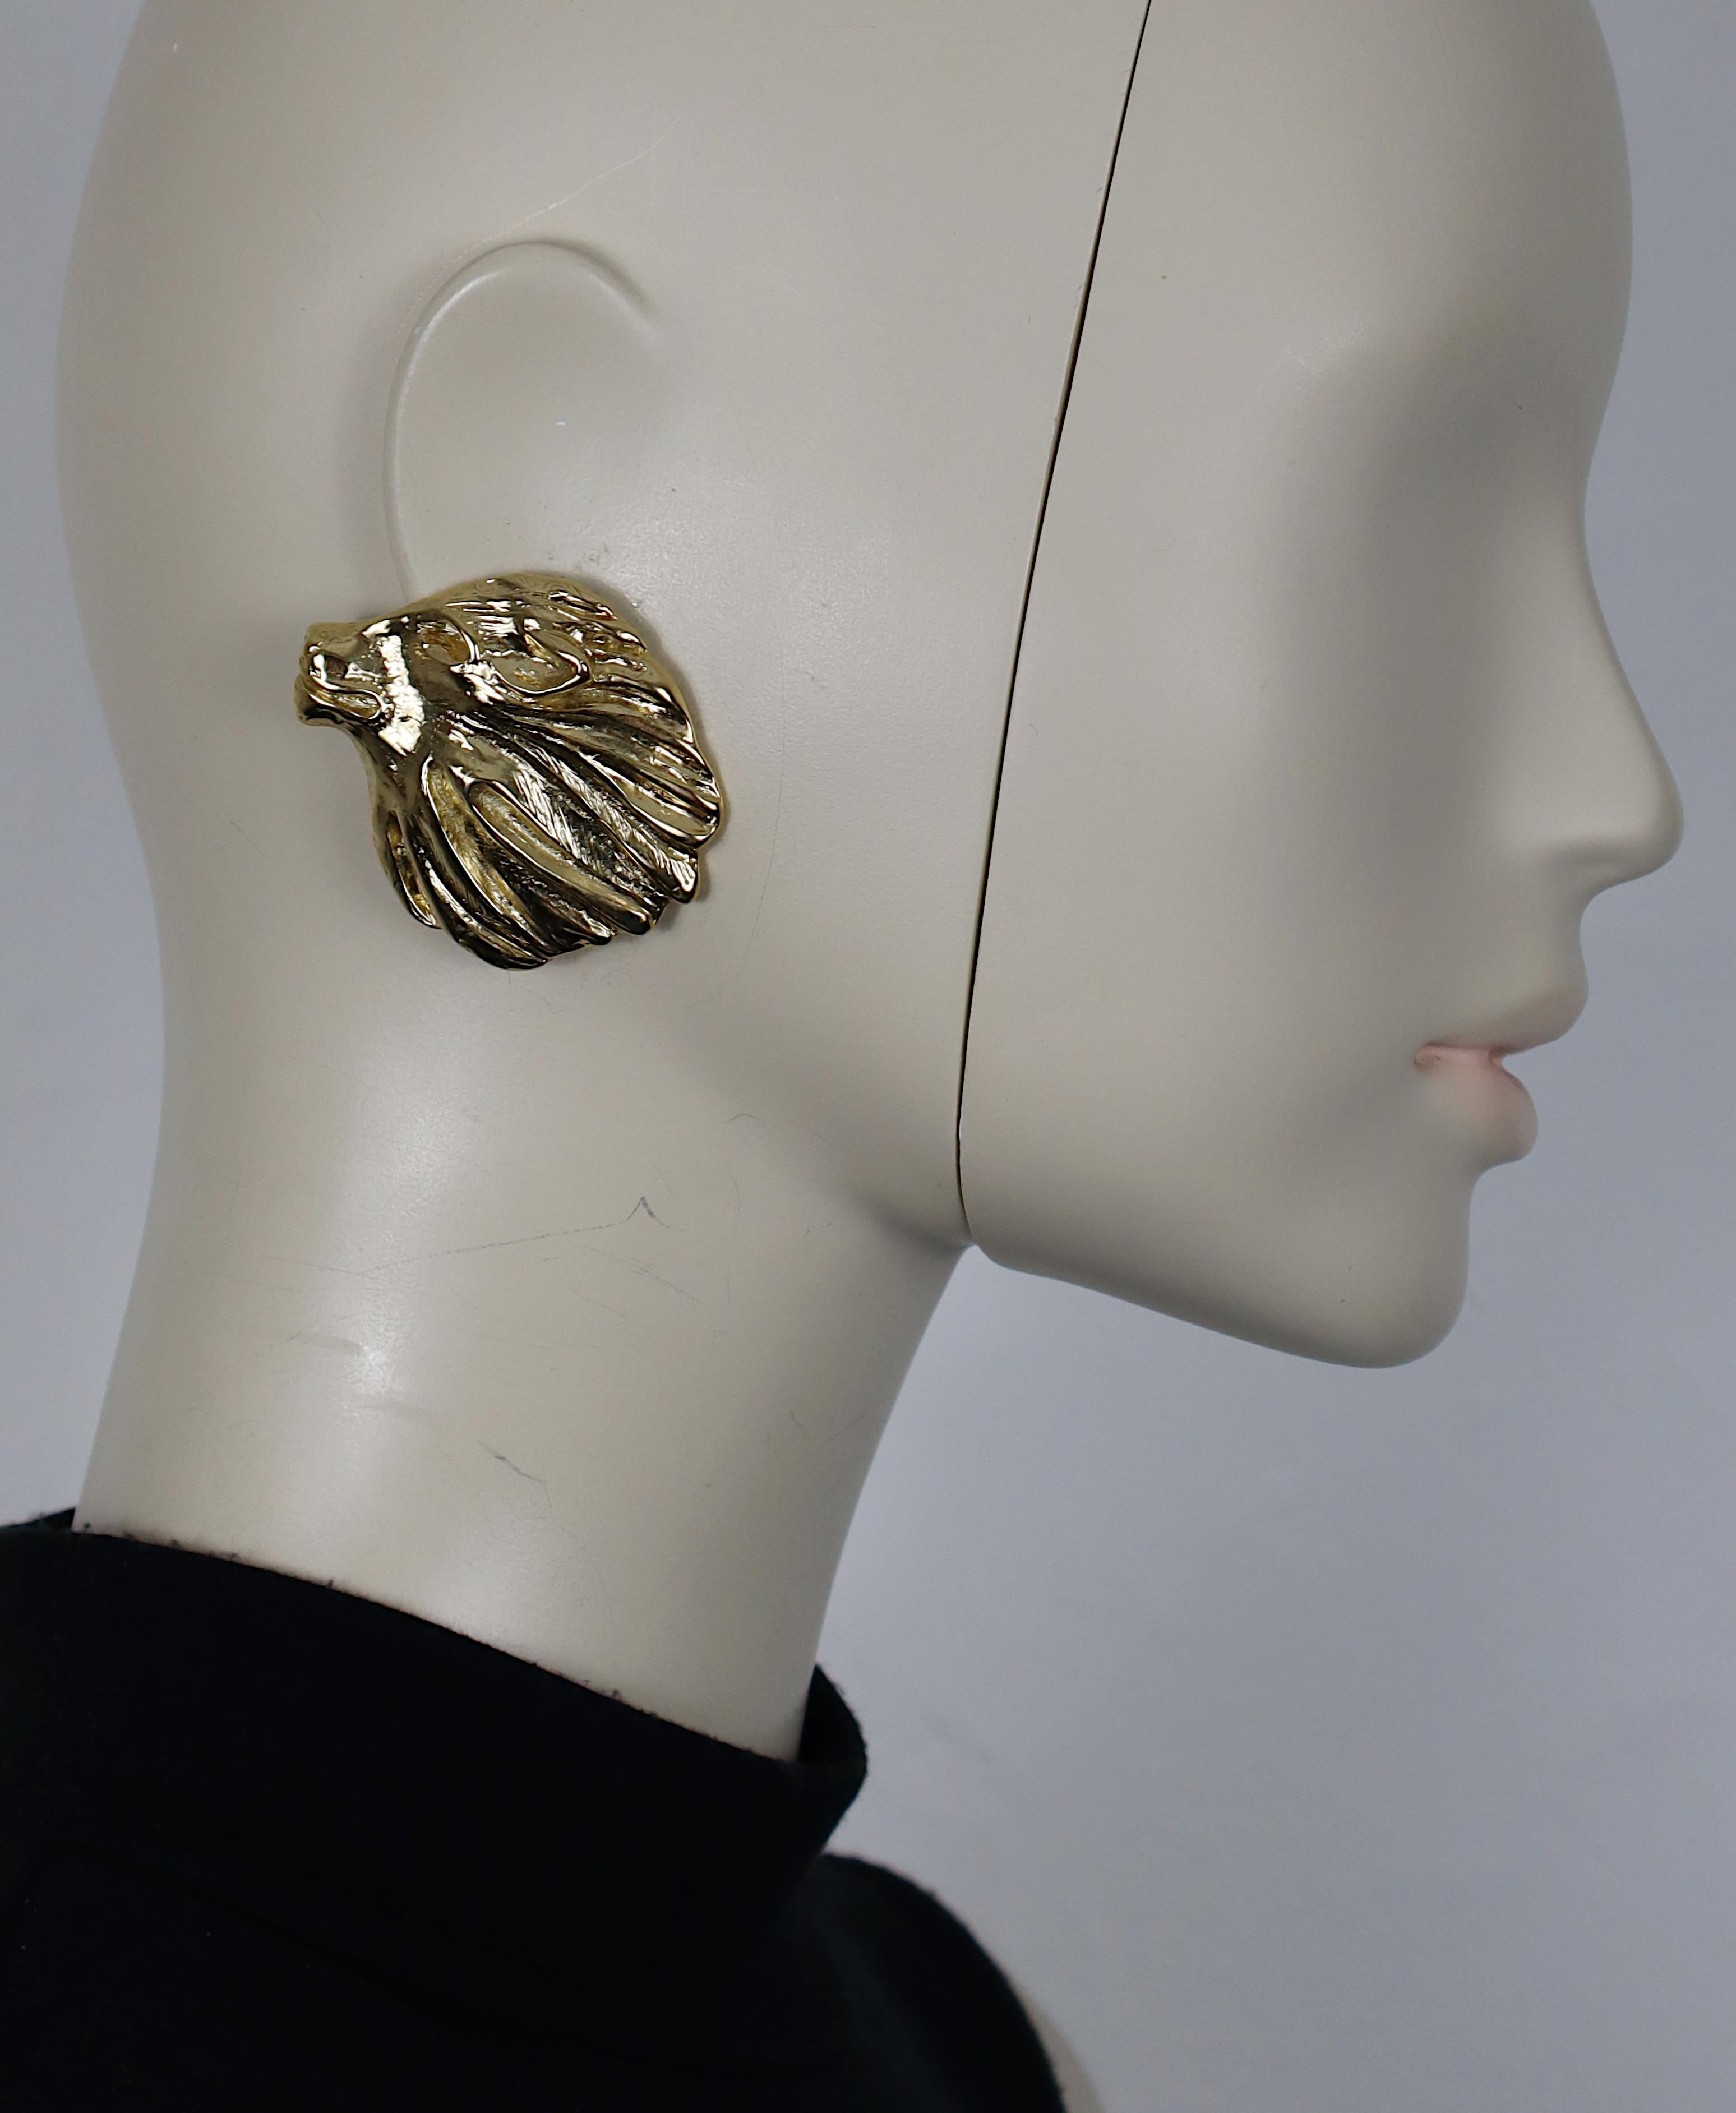 YVES SAINT LAURENT vintage massive gold tone lion head clip-on earrings.

Embossed YSL Made in France.

Indicative measurements : max. width approx. 5.2 cm (2.05 inches) / max height approx. 4.5 cm (1.77 inches).

Max. weight per earring : approx.